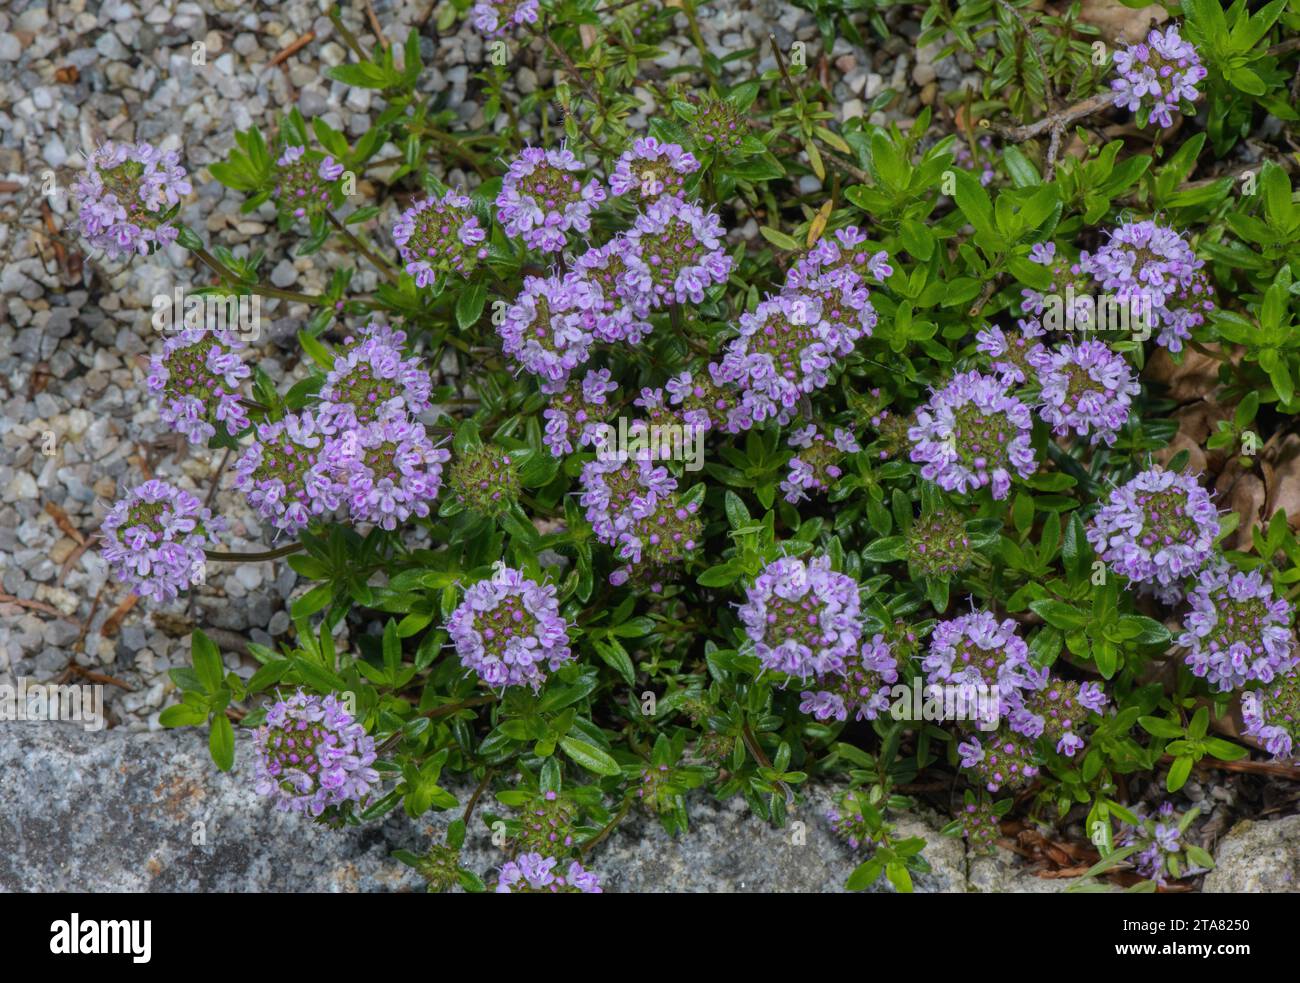 A Wild Thyme, Thymus longicaulis ssp. odoratus in flower, from south-east Europe. Stock Photo